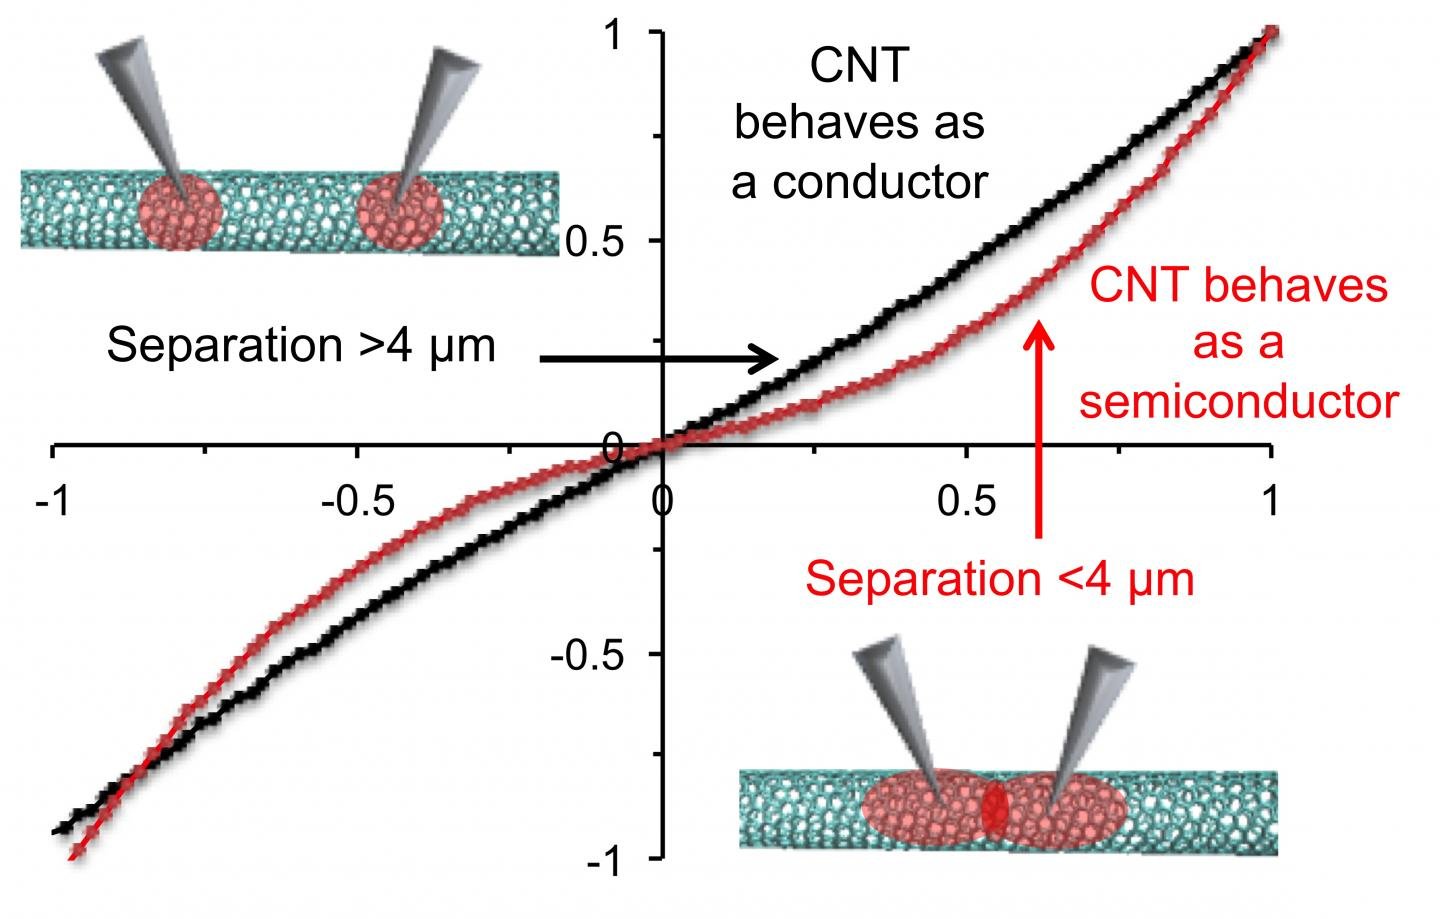 Scientists at Rice and Swansea universities have demonstrated that heating carbon nanotubes at high temperatures eliminates contaminants that make nanotubes difficult to test for conductivity. They found when measurements are taken within 4 microns of each other, regions of depleted conductivity caused by contaminants overlap, which scrambles the results. The plot shows the deviation when probes test conductivity from minus 1 to 1 volt at distances greater or less than 4 microns. Source: Barron Research Group/Rice University